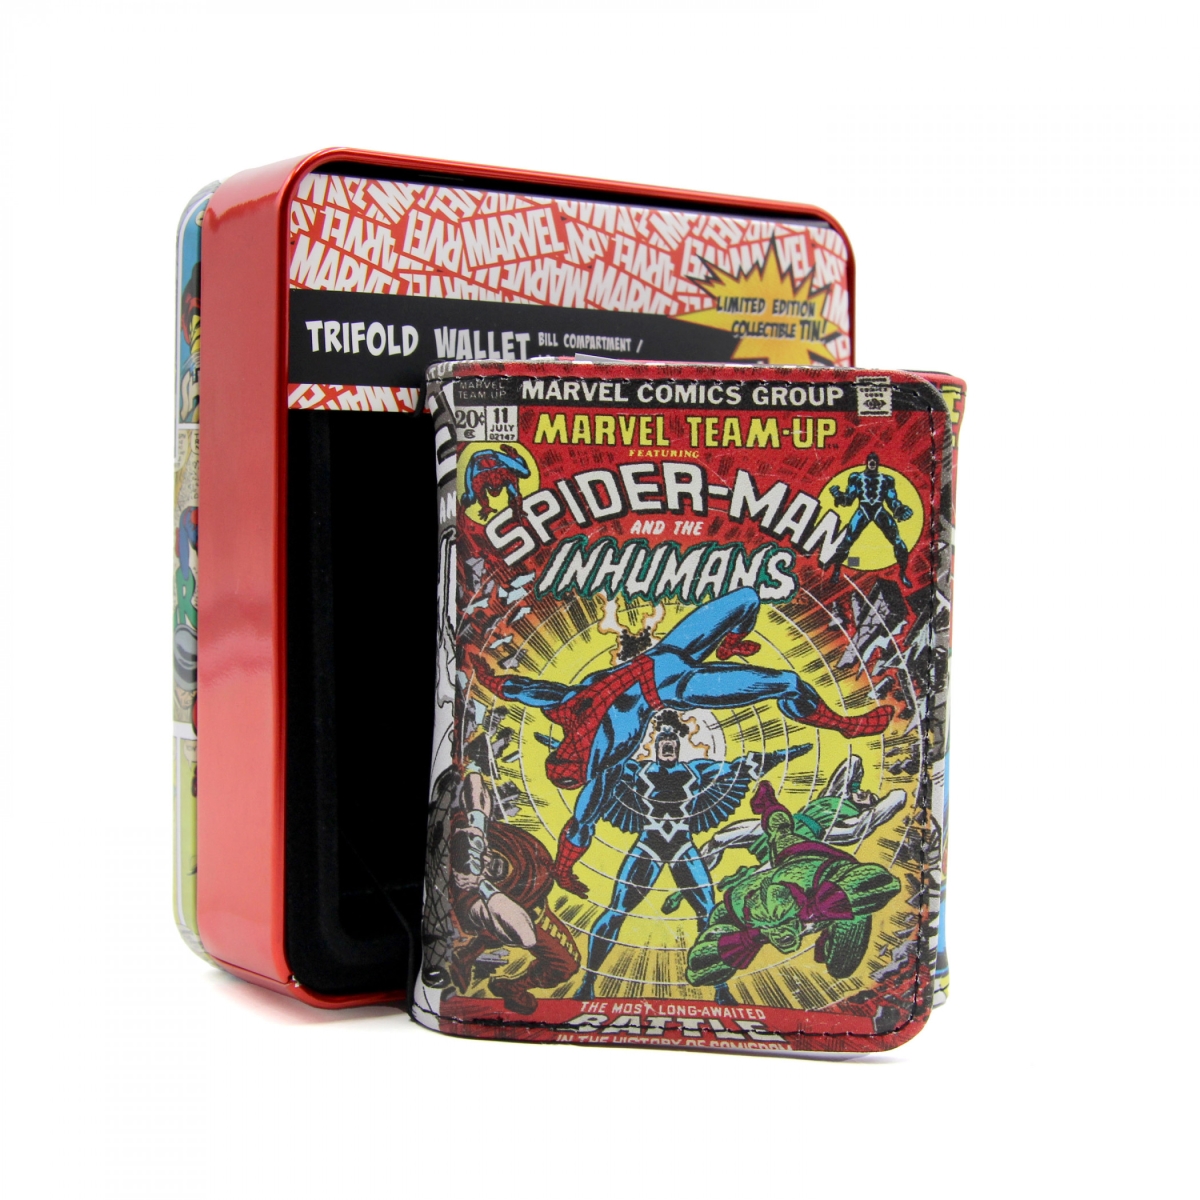 Picture of Spider-Man 870085 Spider-Man & The Inhumans No. 11 Cover Trifold Wallet in Collectors Tin